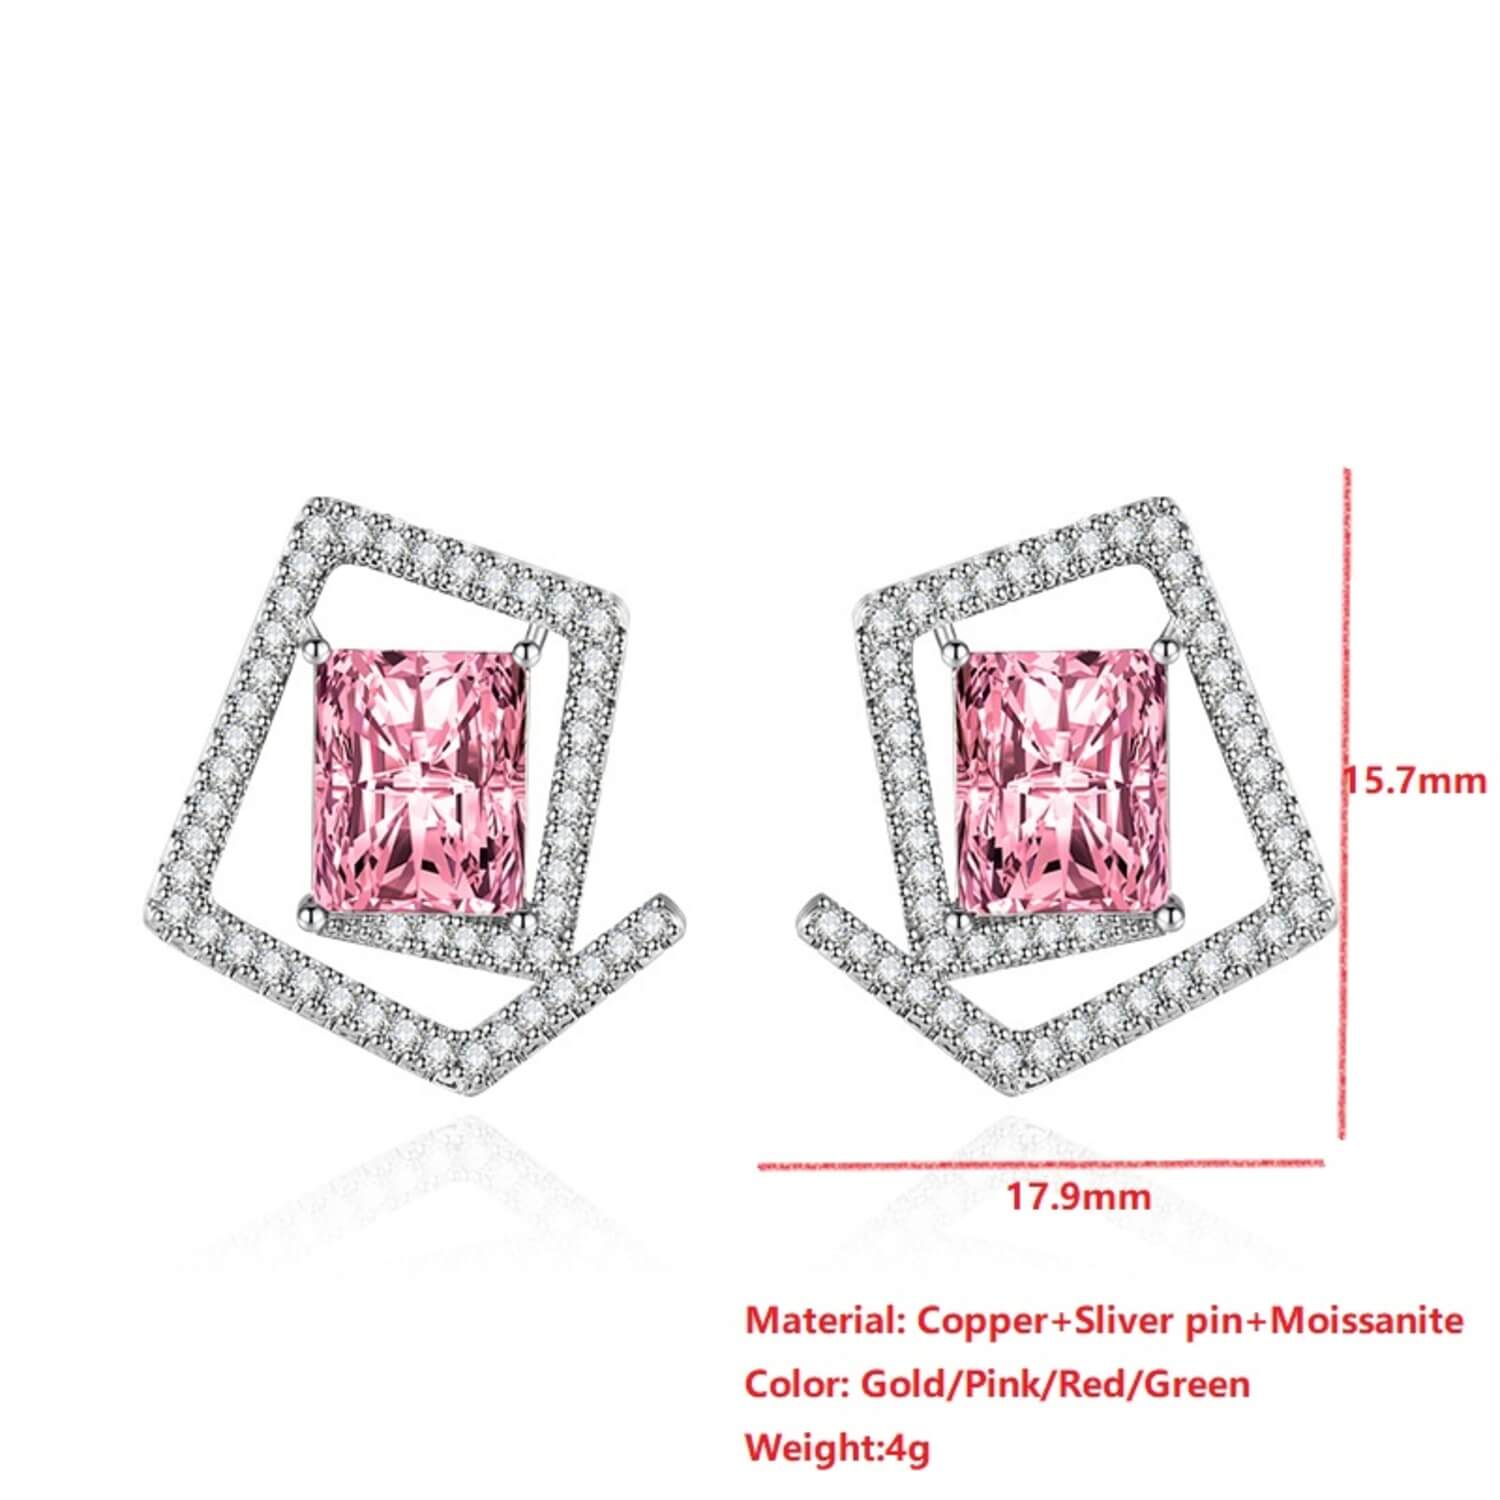 18K Gold Plated Silver Brilliant Cut Simulated Diamond Cubic Zirconia Stud Earrings